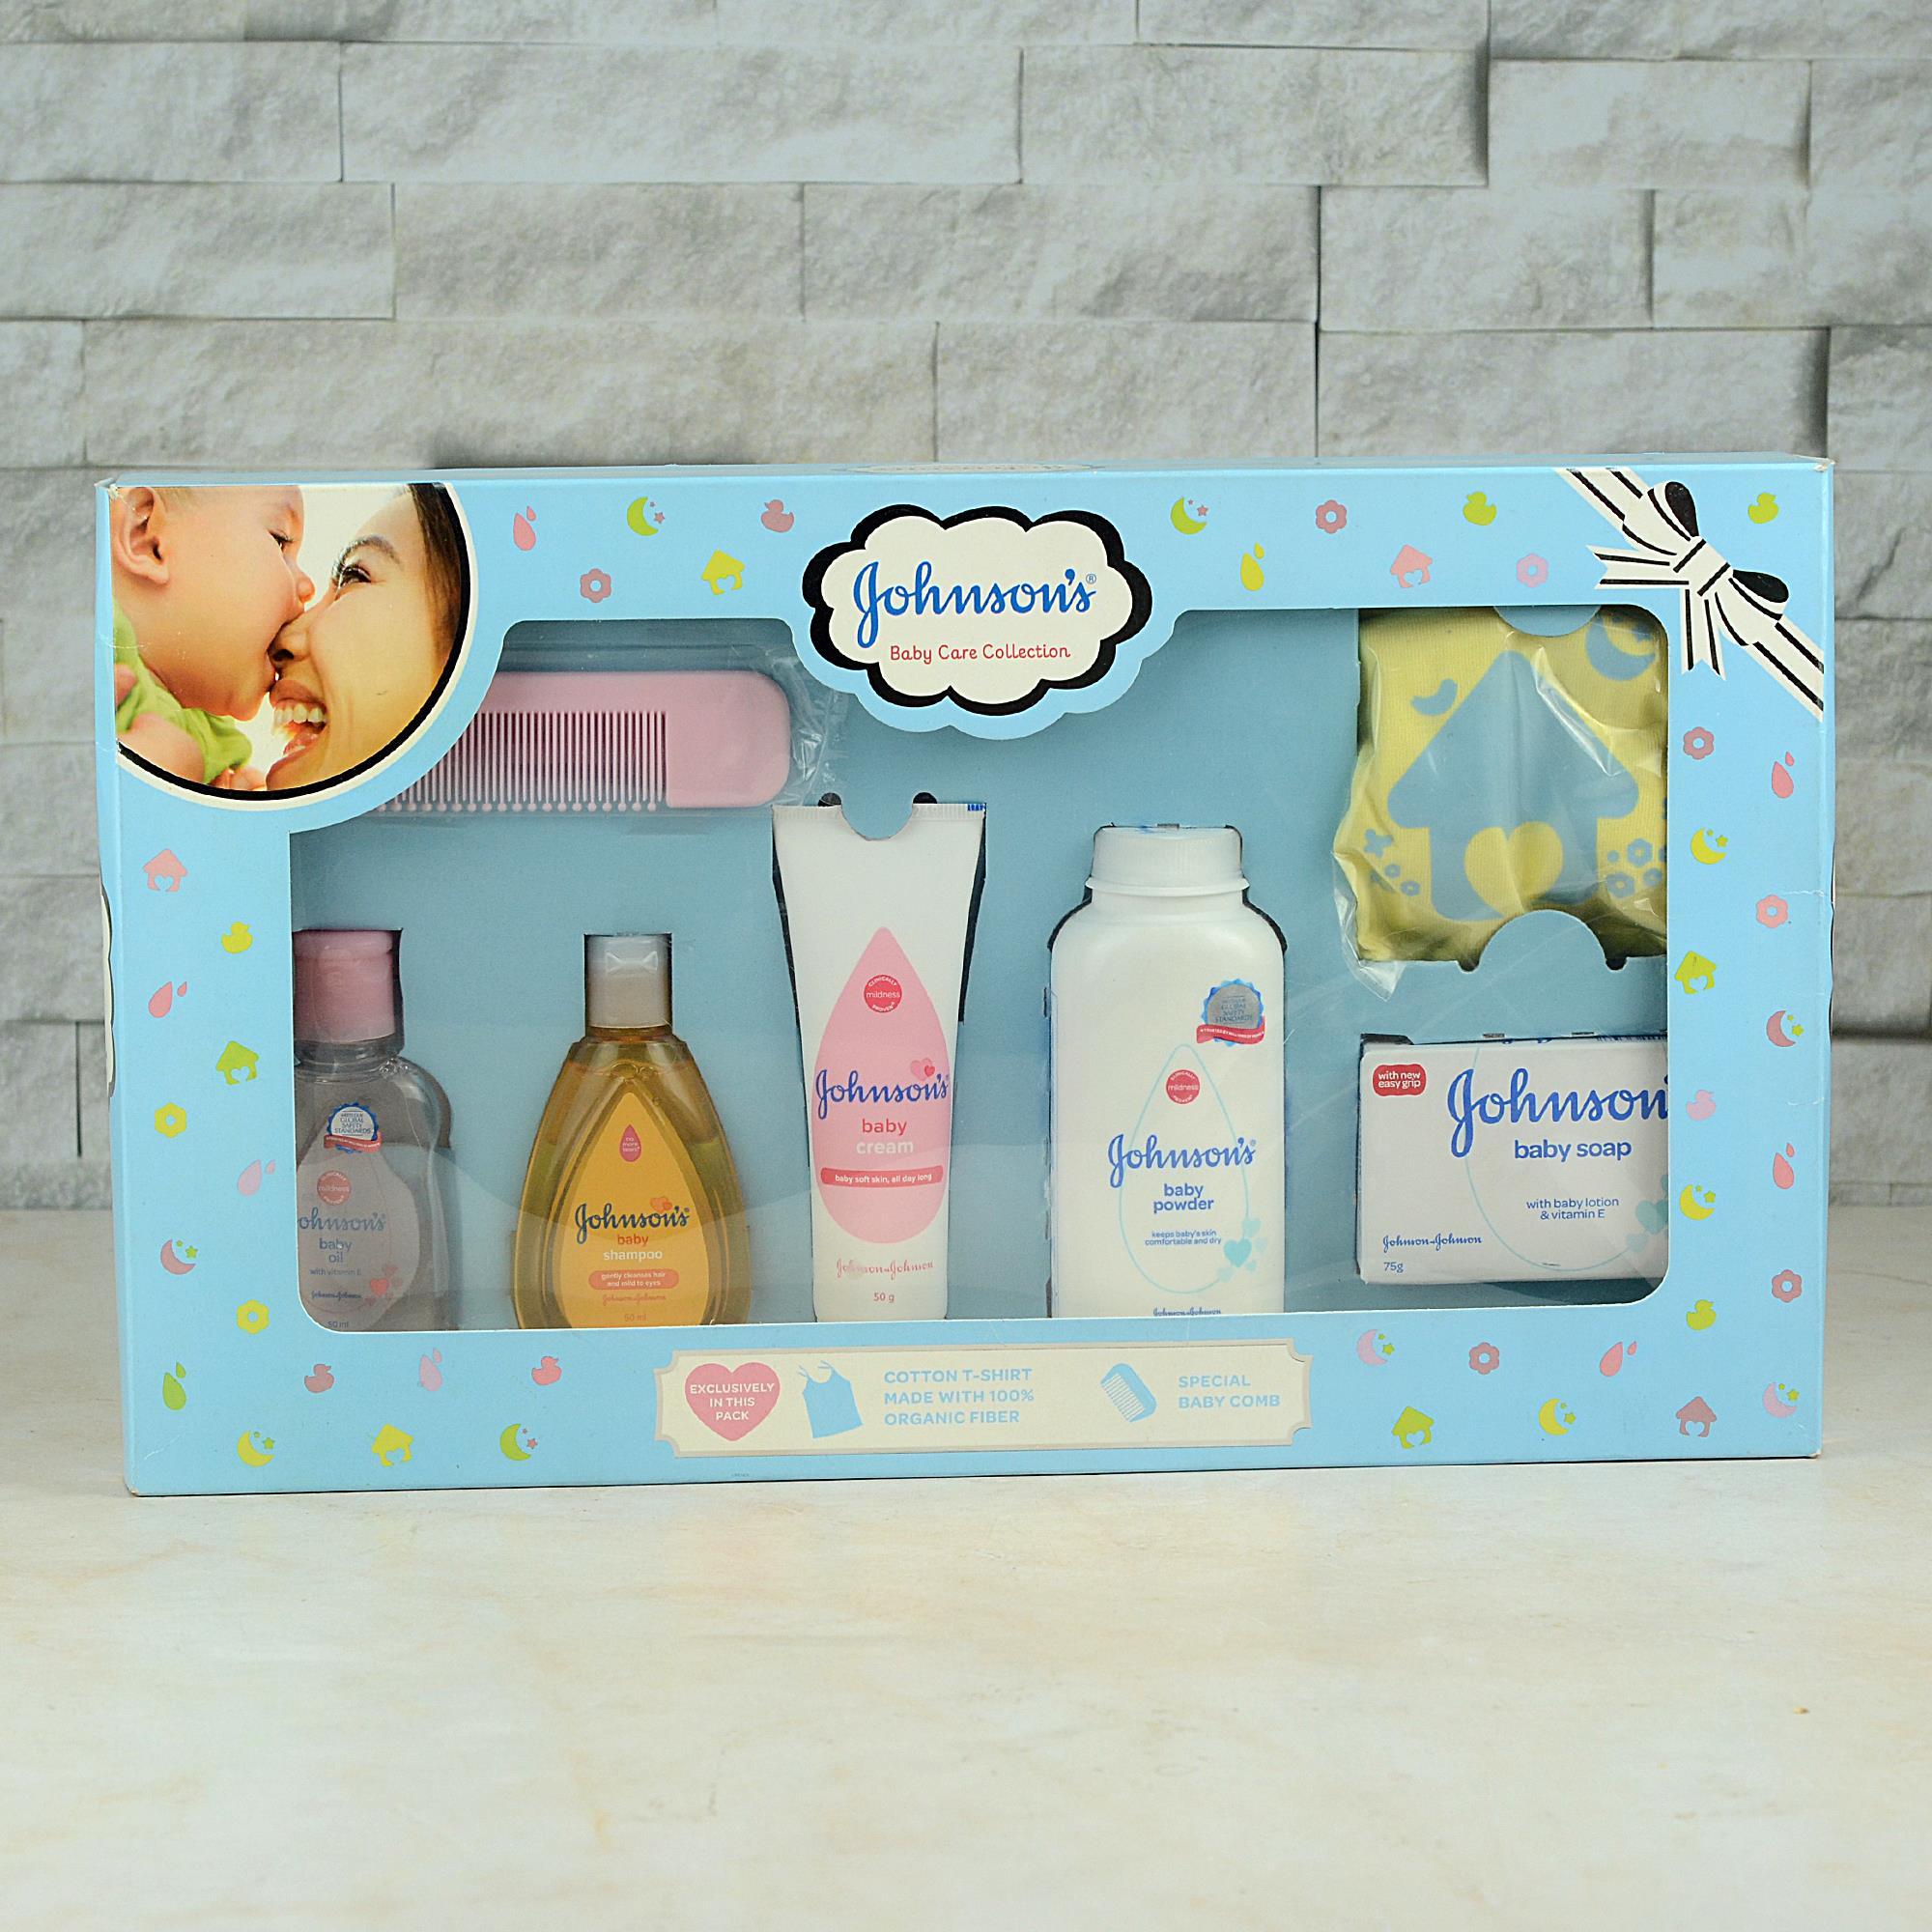 Johnson's Baby Care Collection